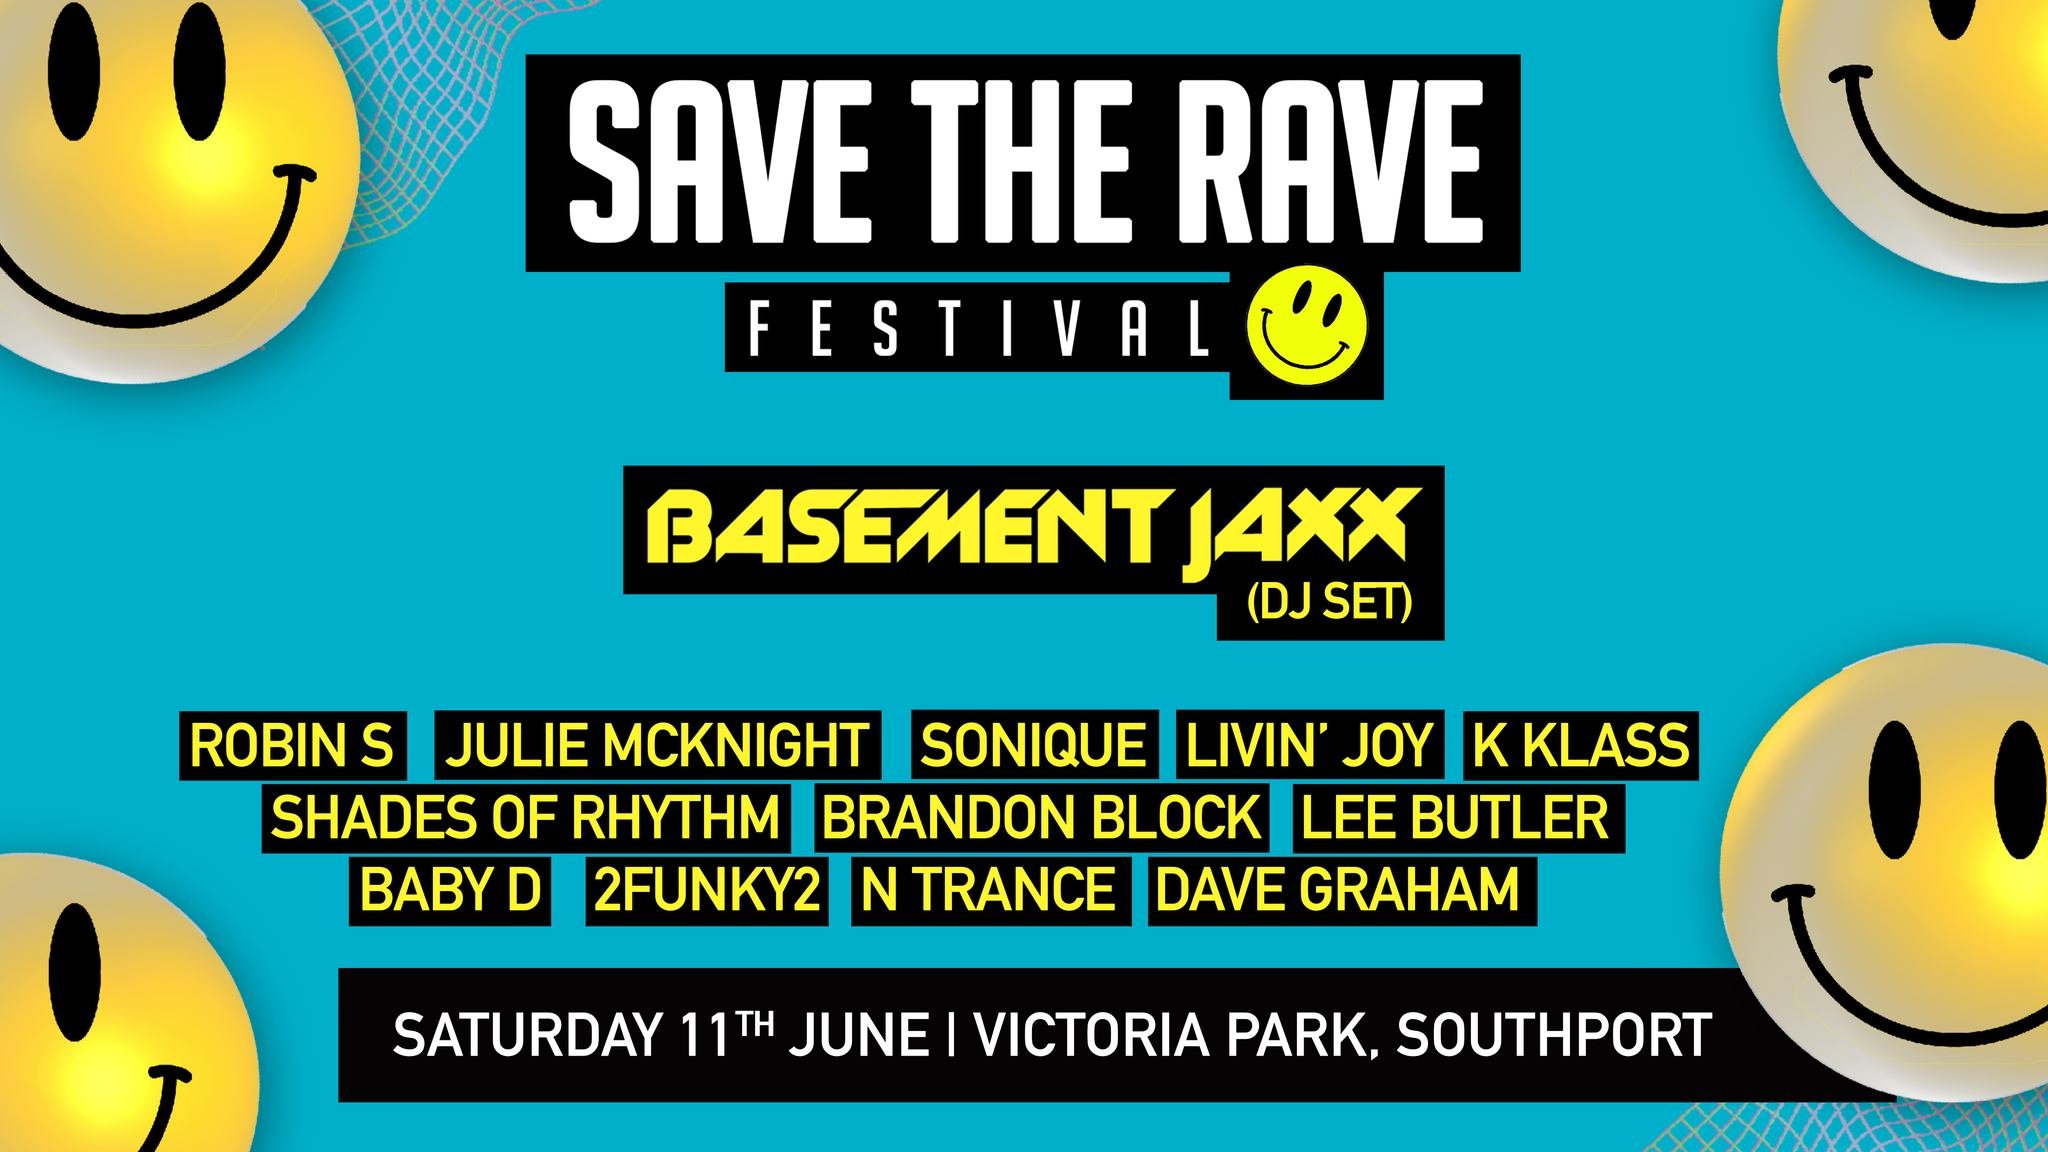 Save The Rave Outdoor 90's Festival Tickets Now On Sale